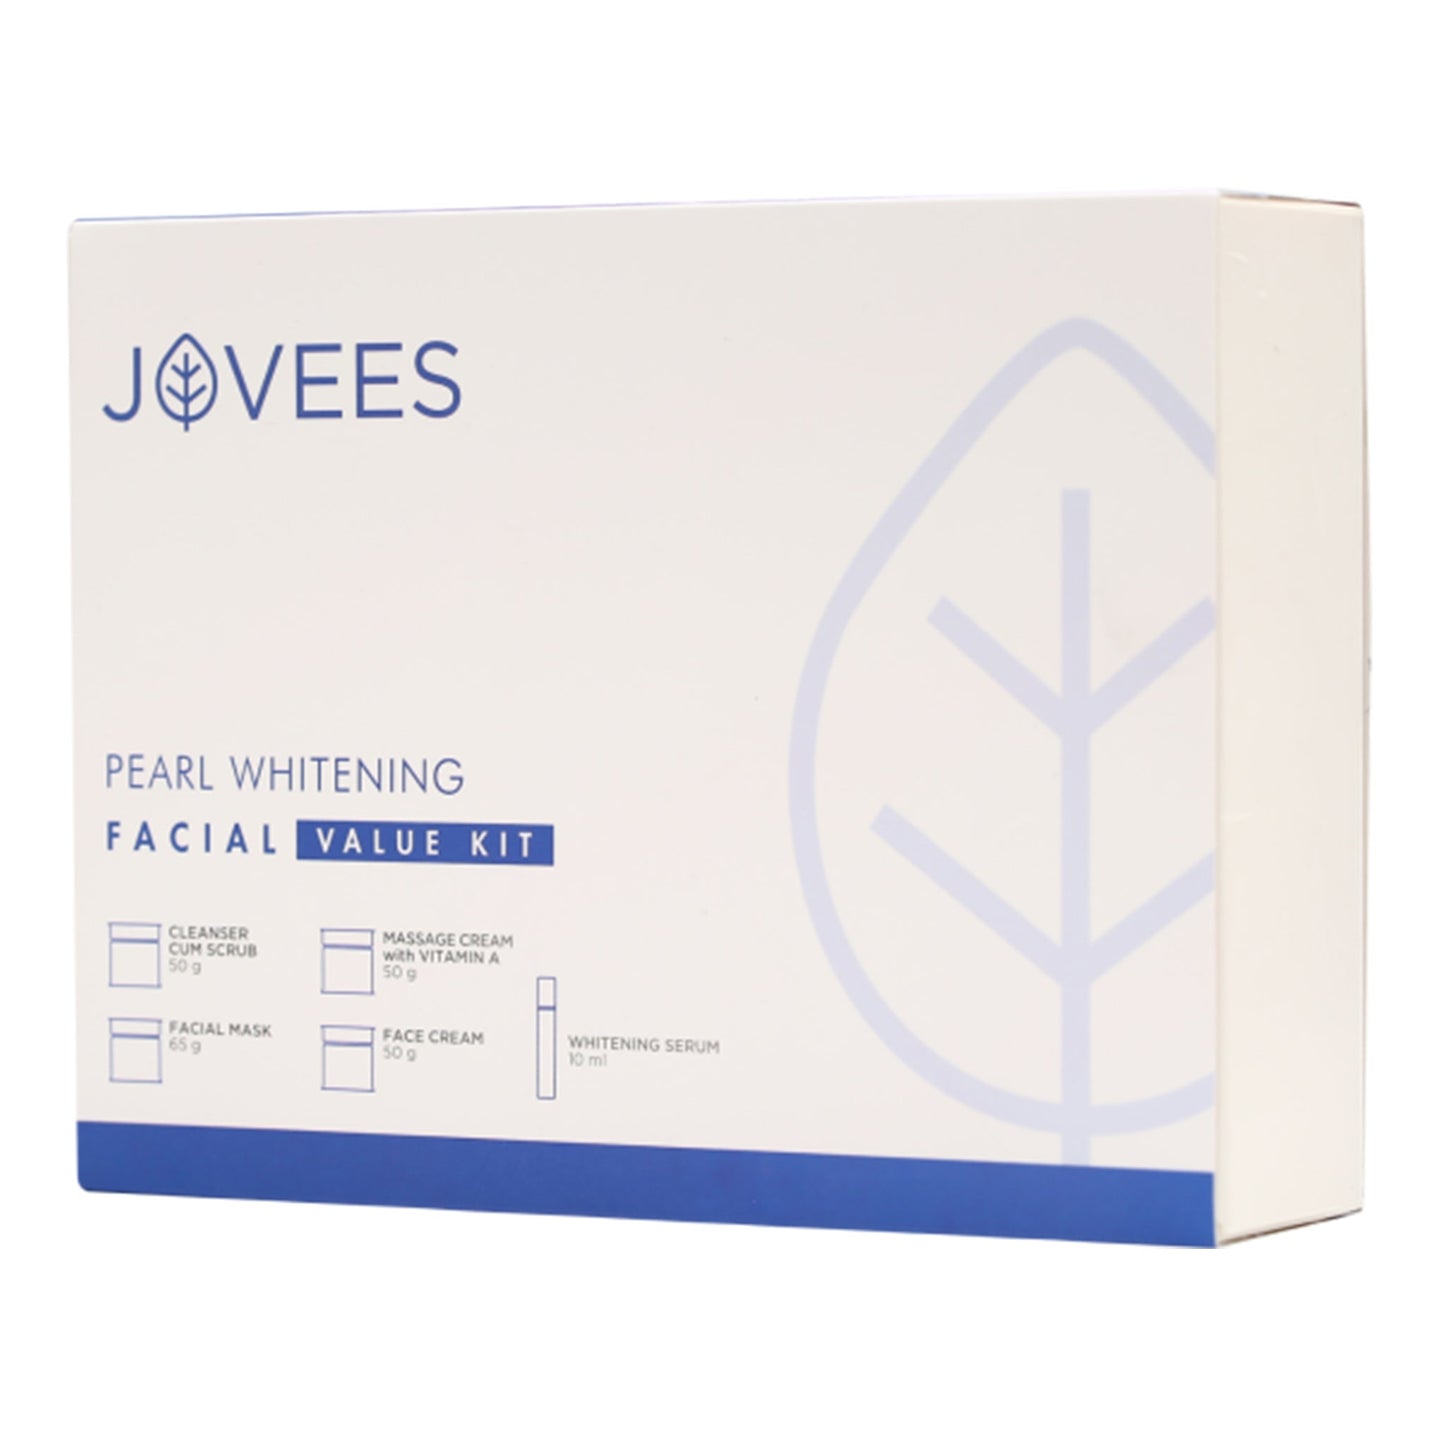 JOVEES - PEARL WHITENING FACIAL VALUE KIT - 50G